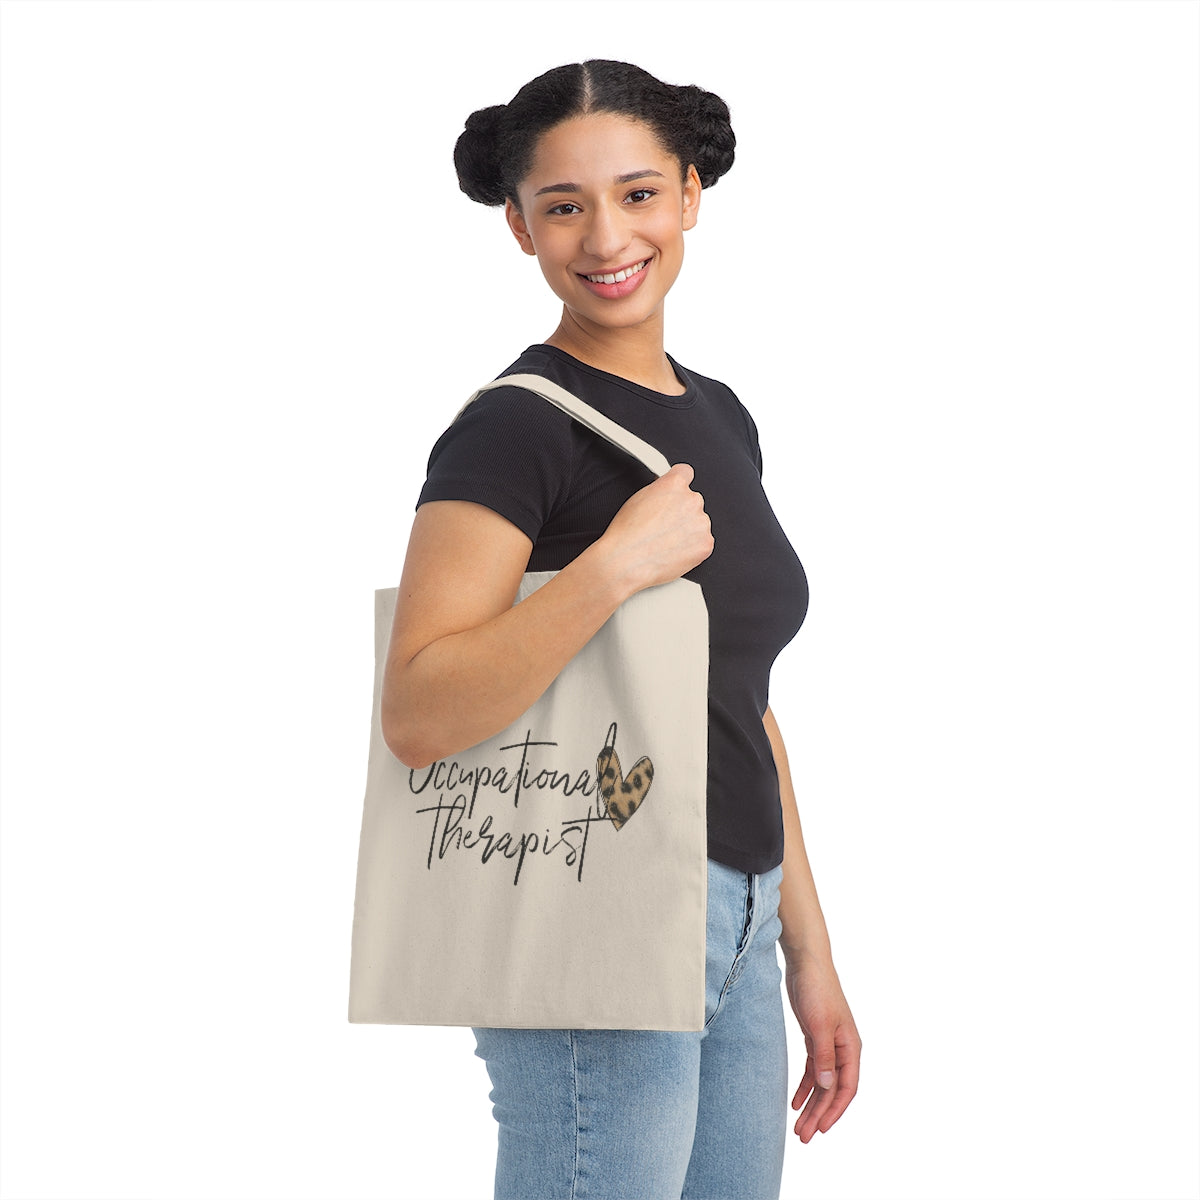 Occupational Therapist OT Canvas Tote Bag